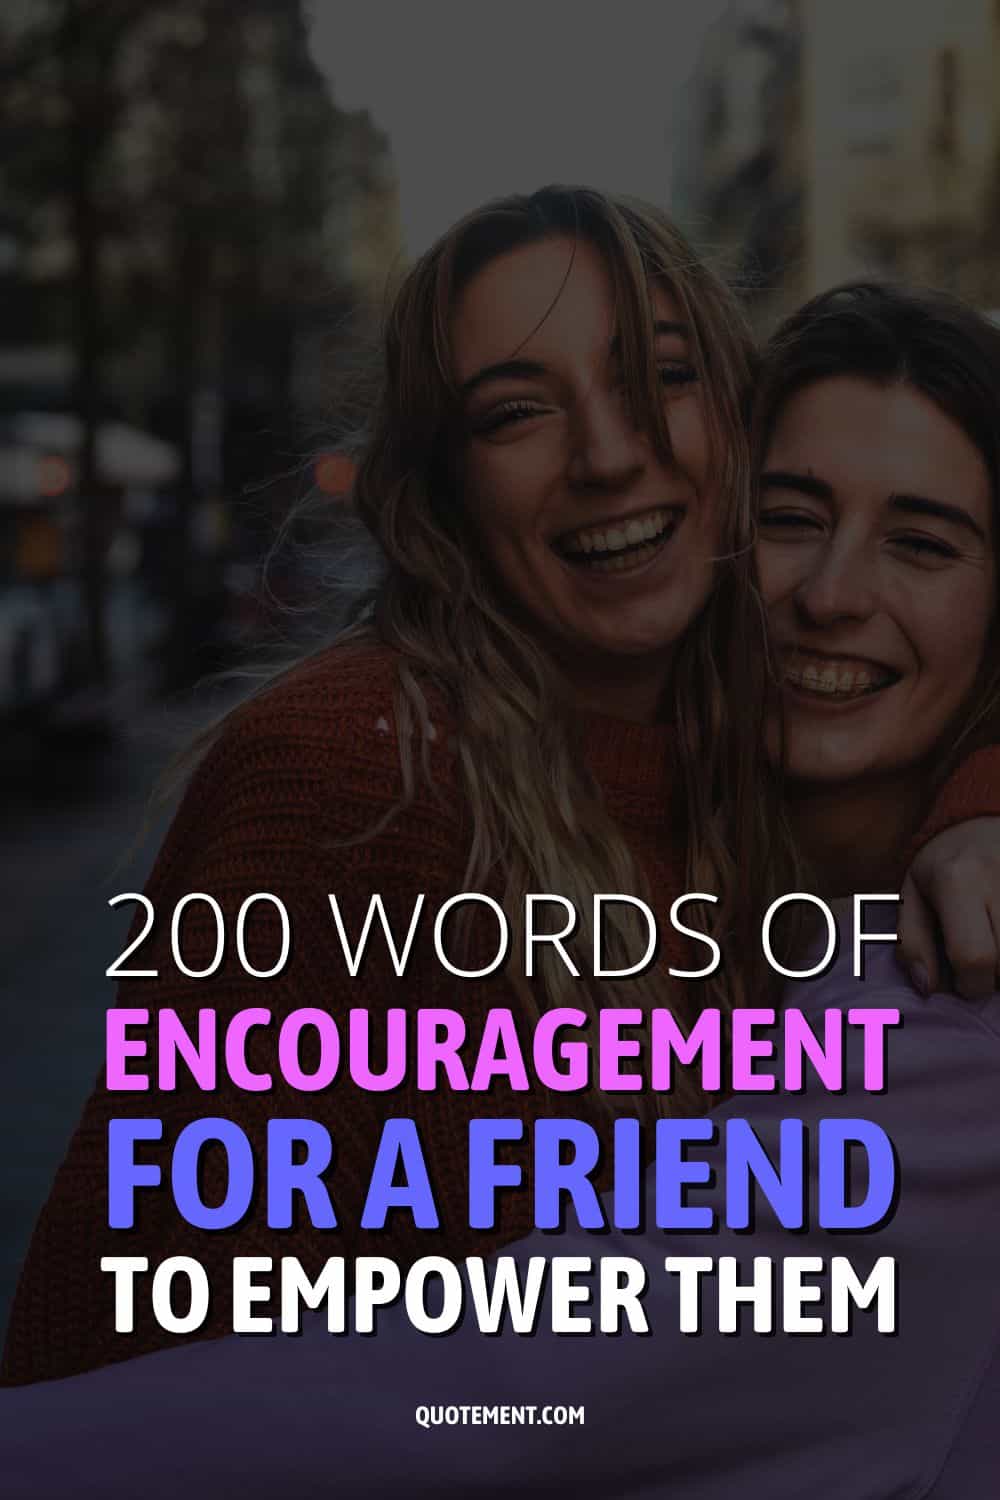 200 Words of Encouragement For A Friend To Empower Them